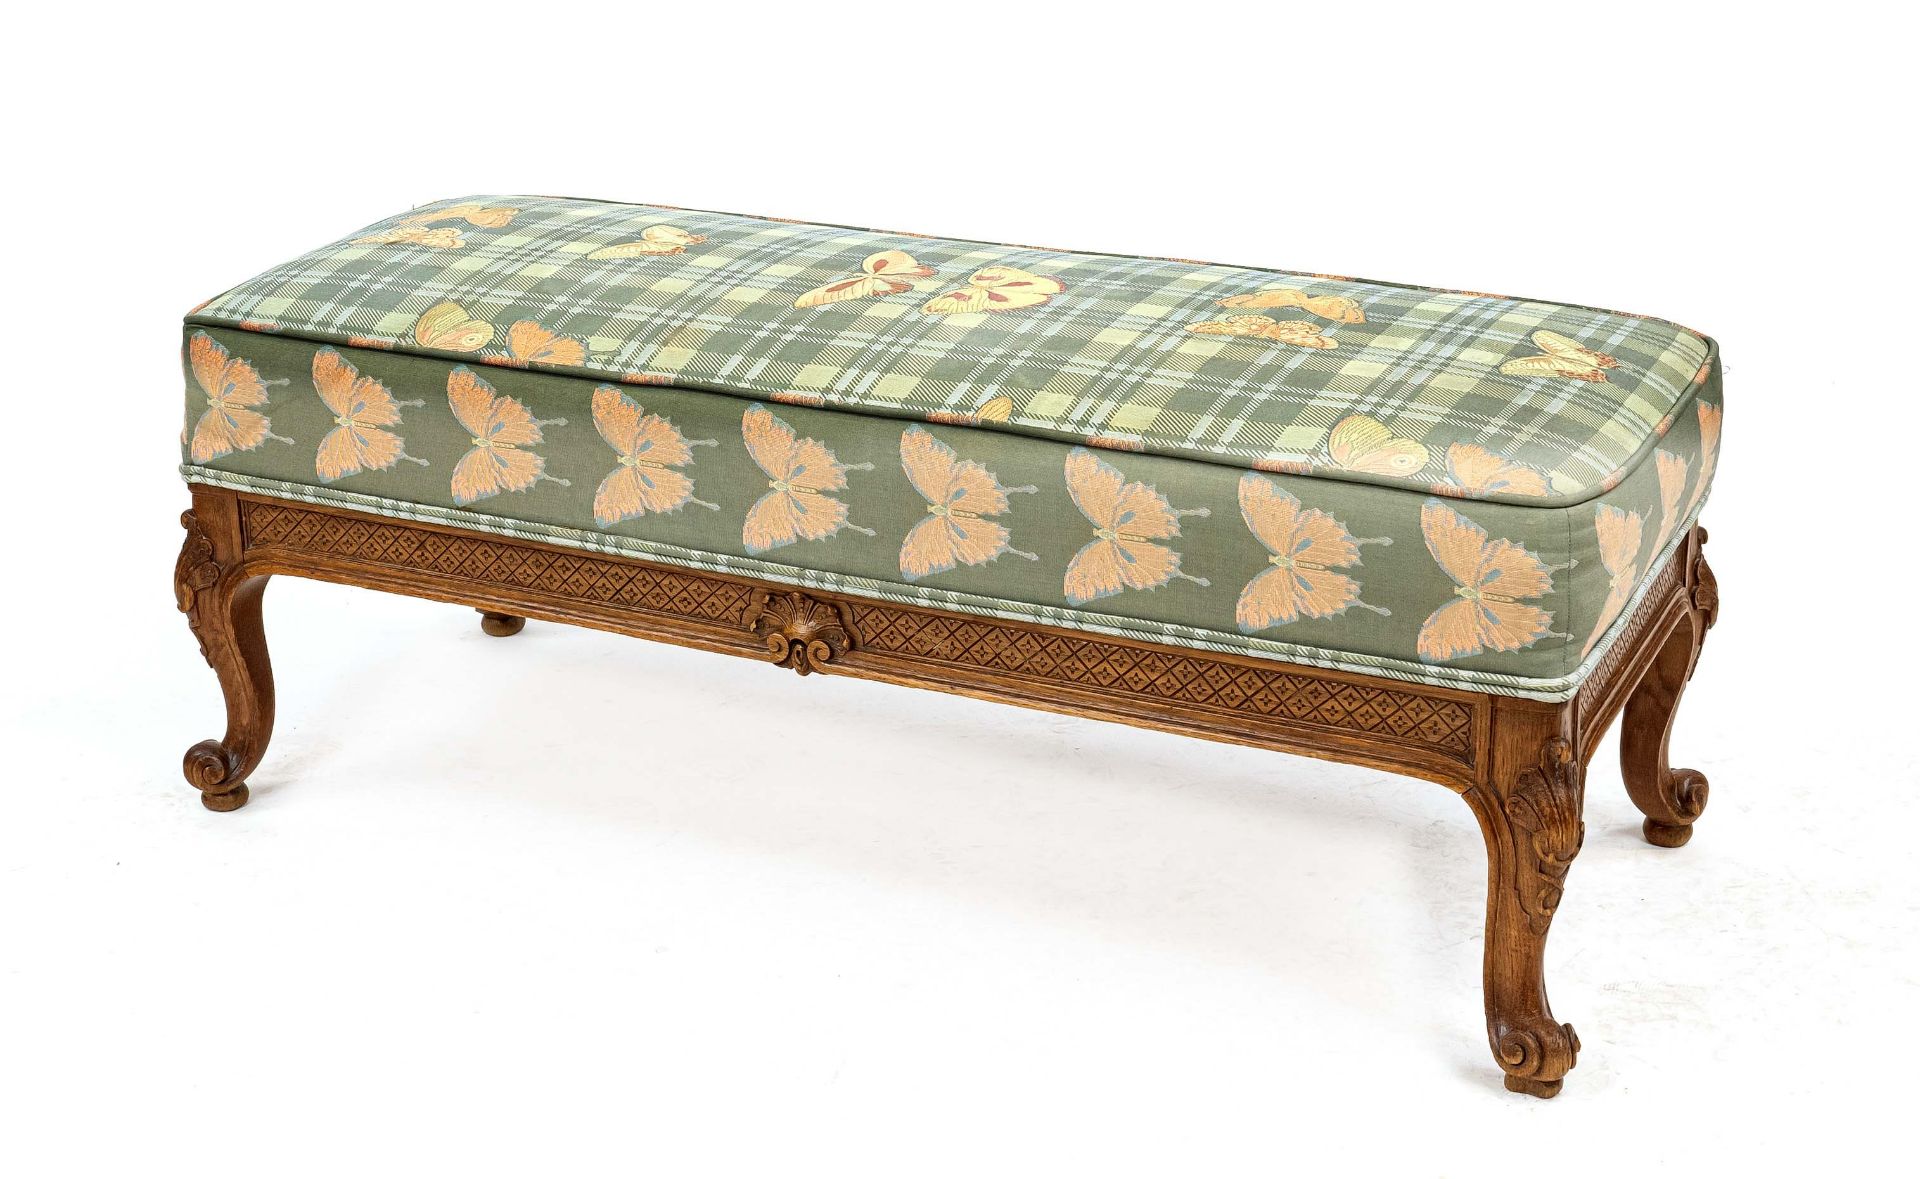 Bench in baroque style, 20th century, solid oak, carved all around, 45 x 120 x 49 cm